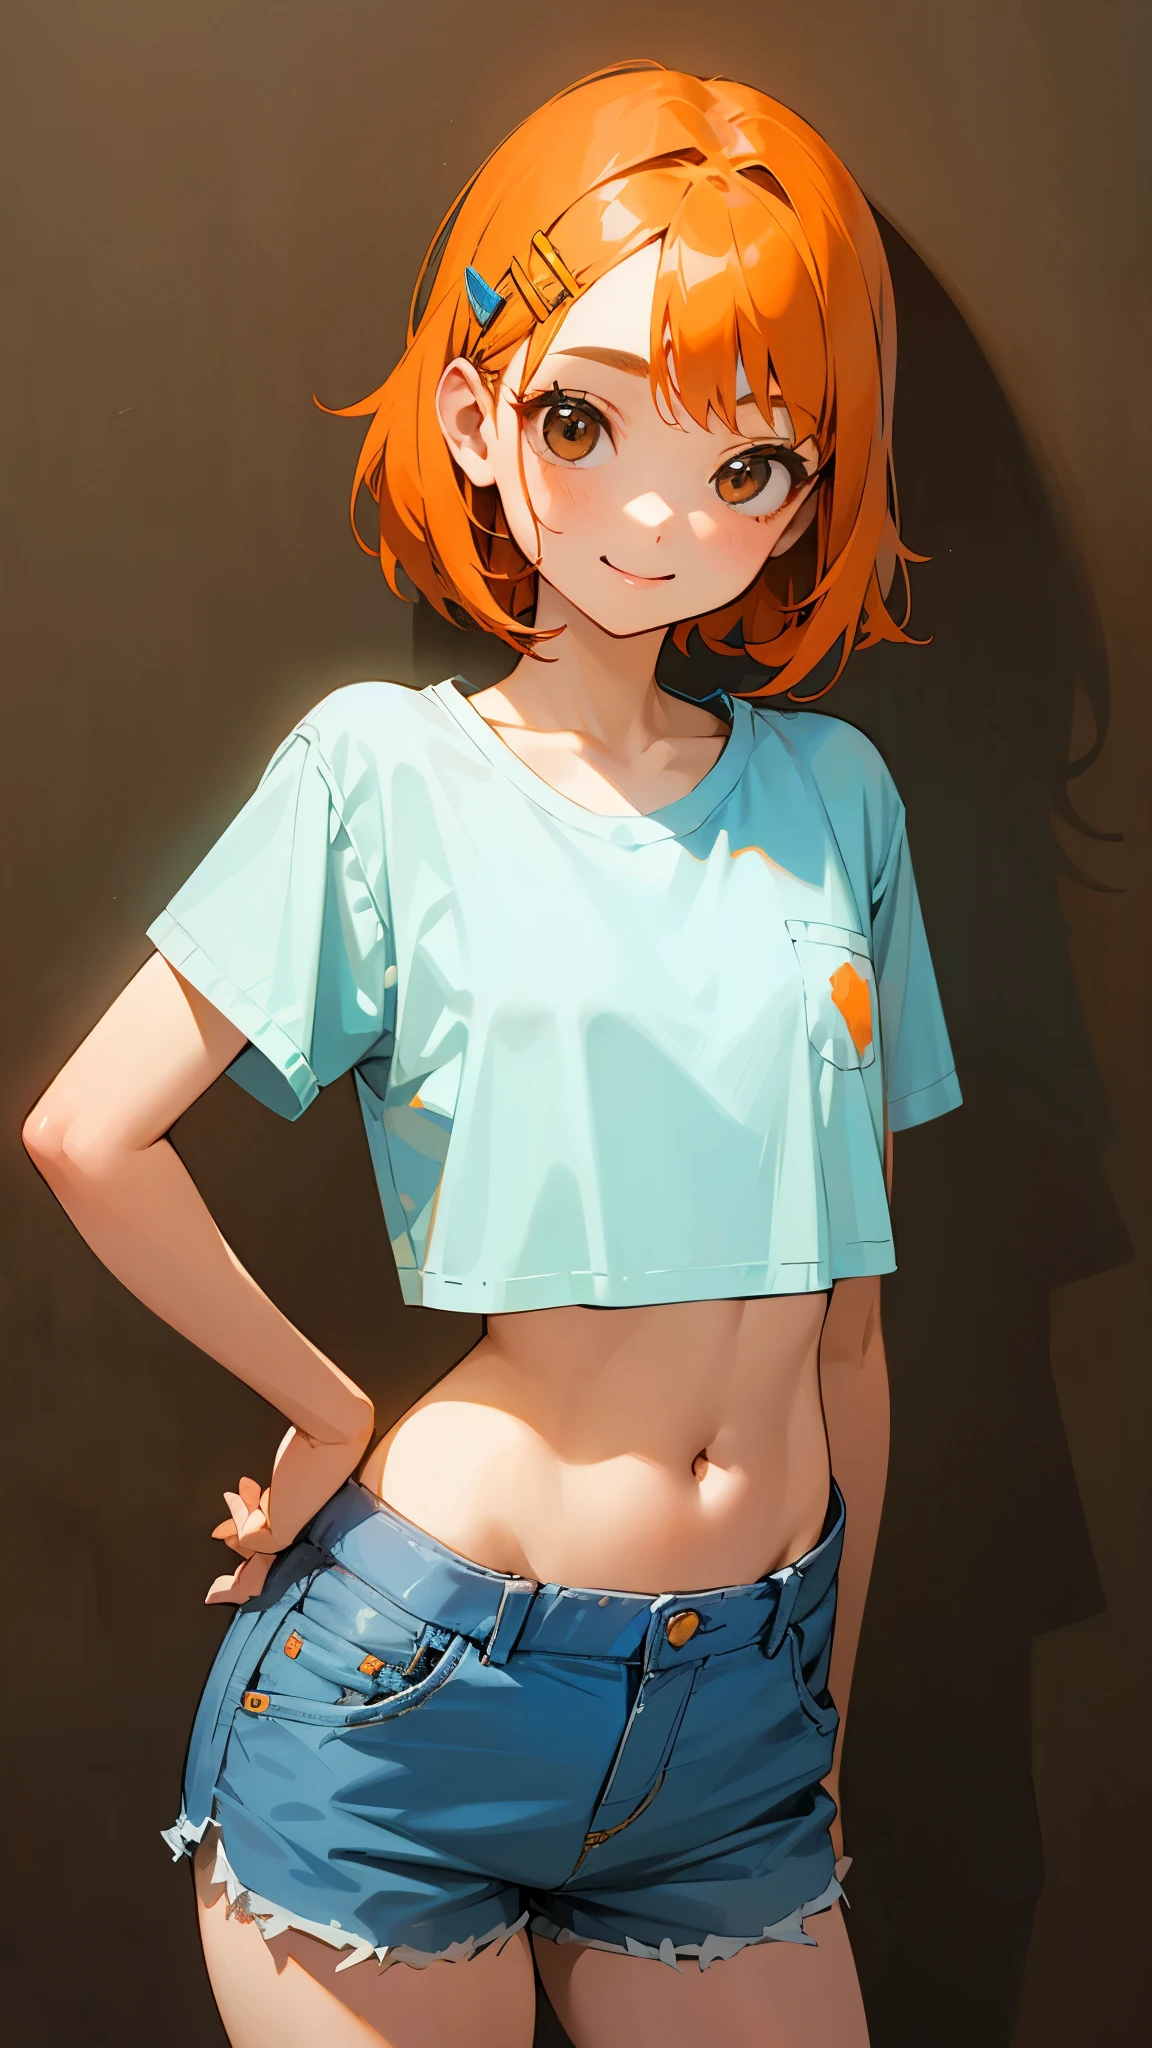 1 girl、Cowboy Shot、Simple T-shirt、light blue medium hair、Beautiful brown eyes、Orange Hair Clip、Flat Chest、smile、Please put your hands on your hips、Shorts